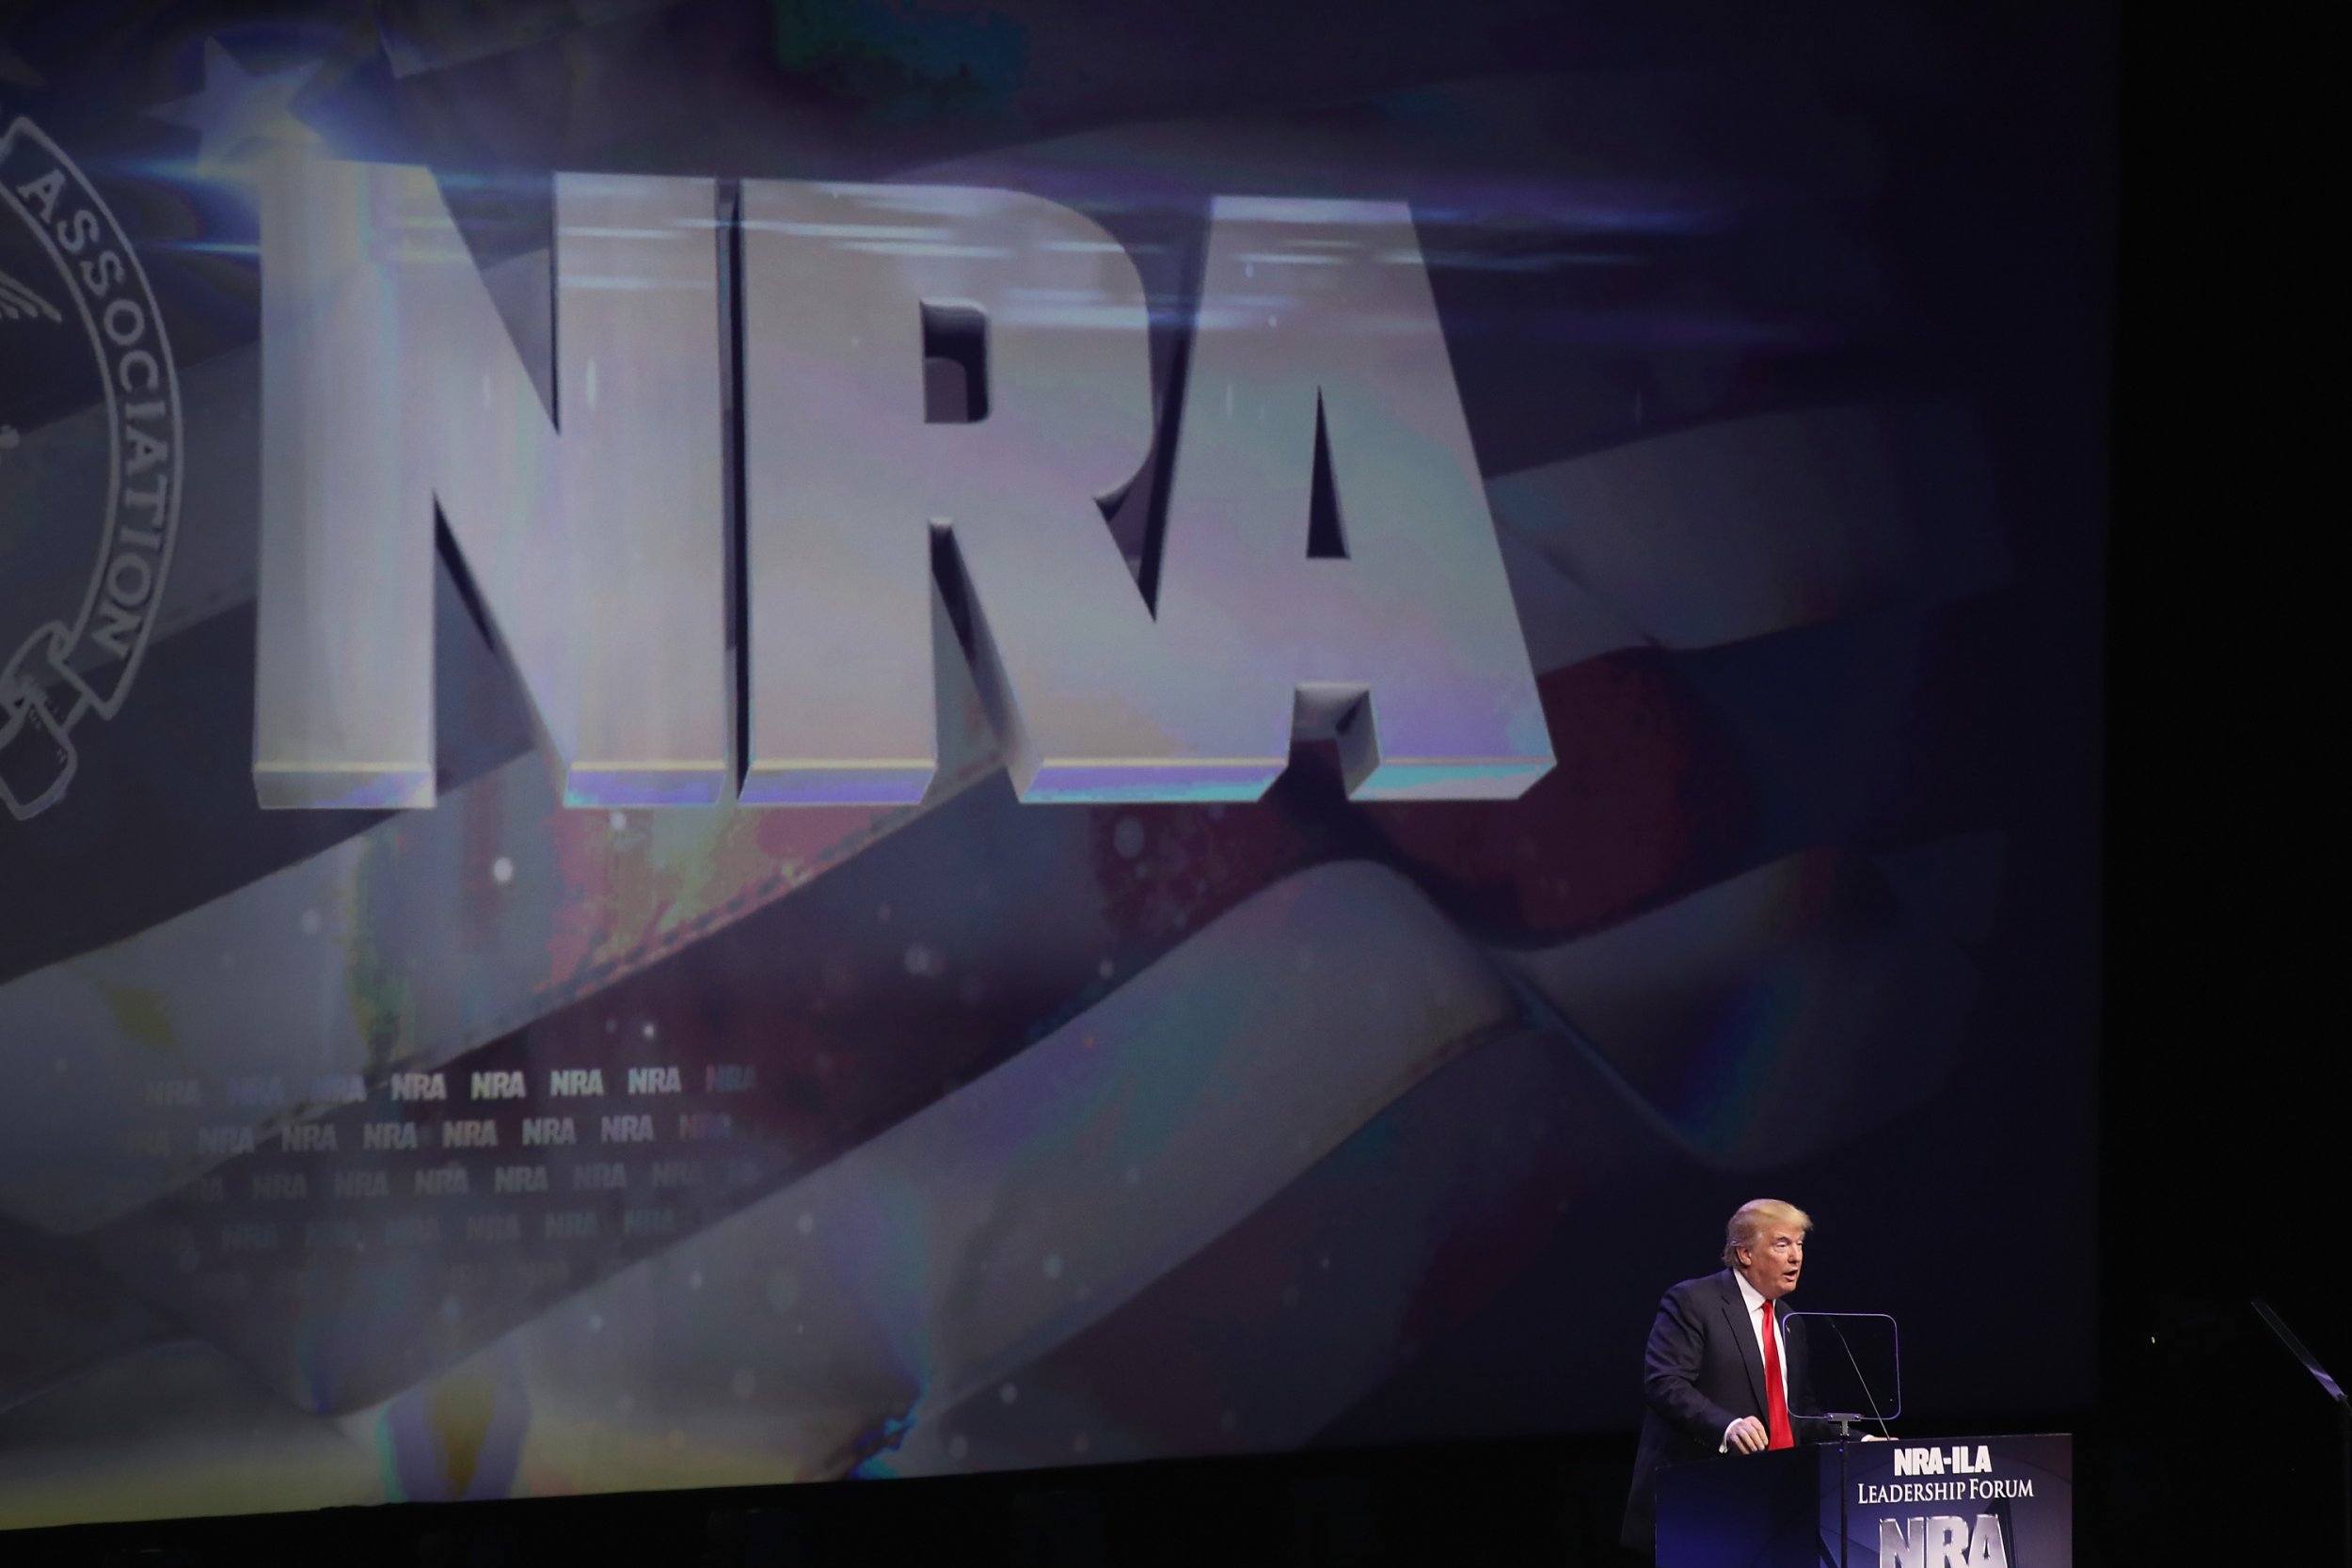 Nra Blasted For Cozying 'up To Putin' In Latest Video - Public Speaking , HD Wallpaper & Backgrounds